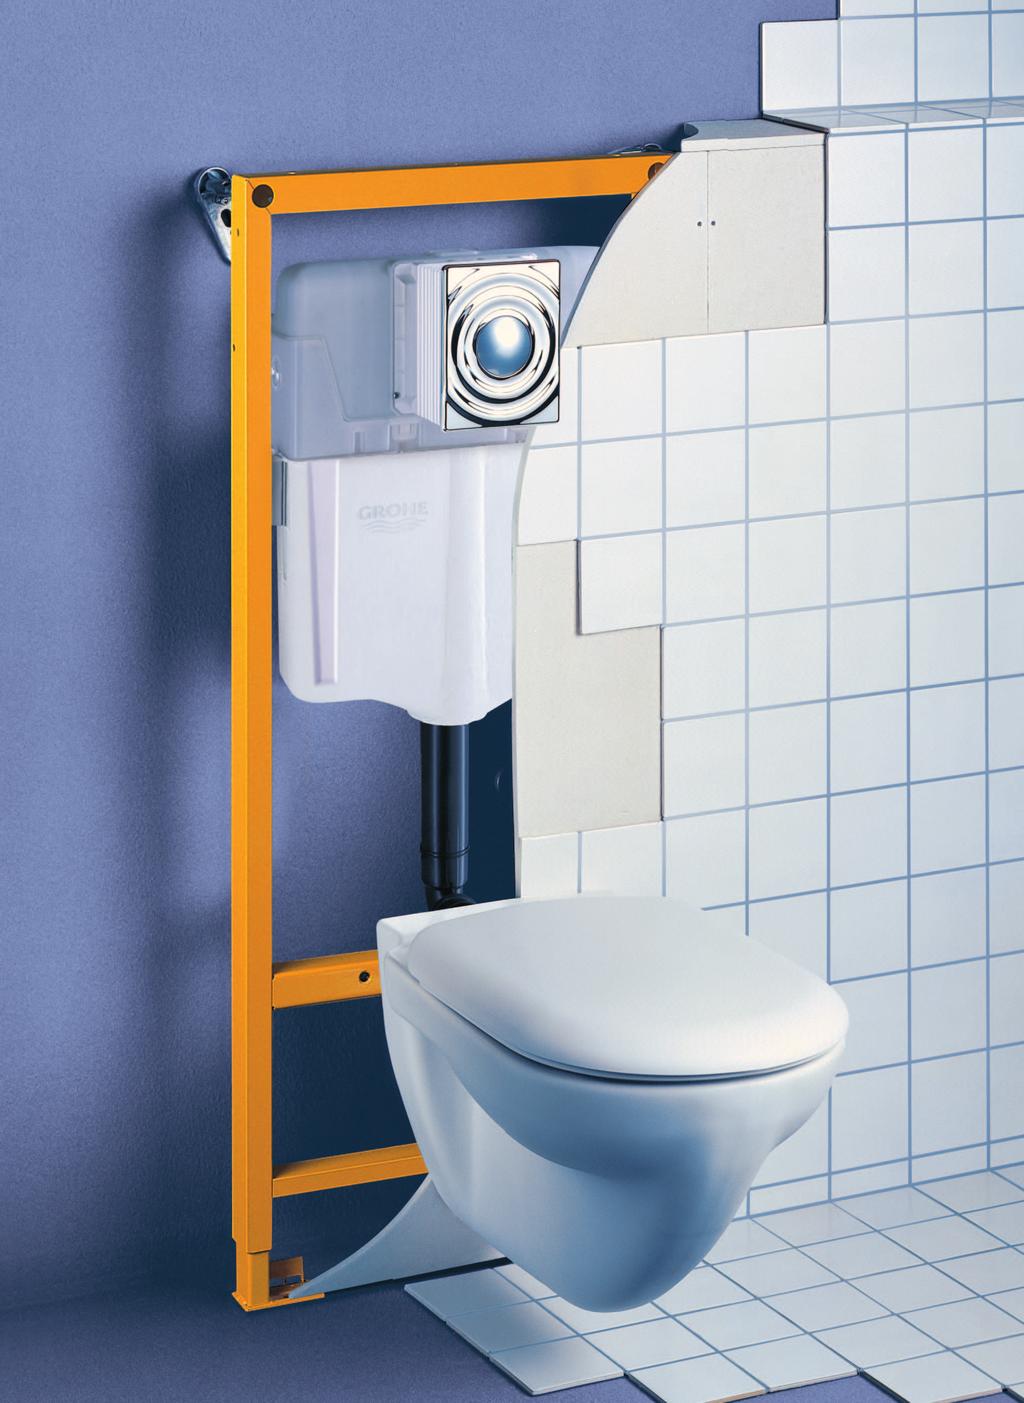 5 l, front actuation, for inside studded wall or against the wall using brackets - Without Dual / Single Wall Plate for front wall installation allows individual bathroom design and is a complete